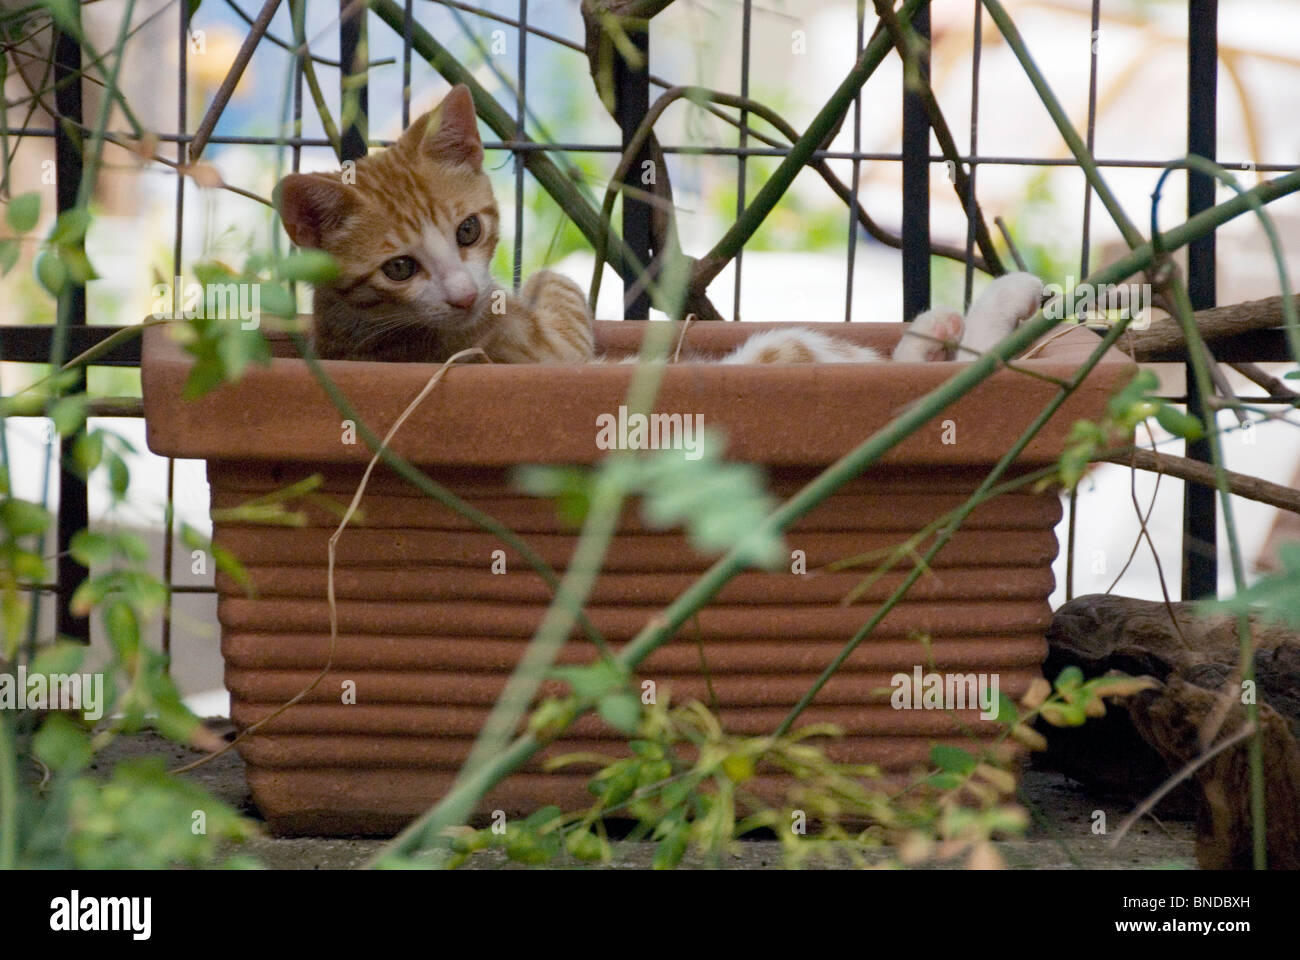 Kitten putting his feet up in a flower trough Stock Photo